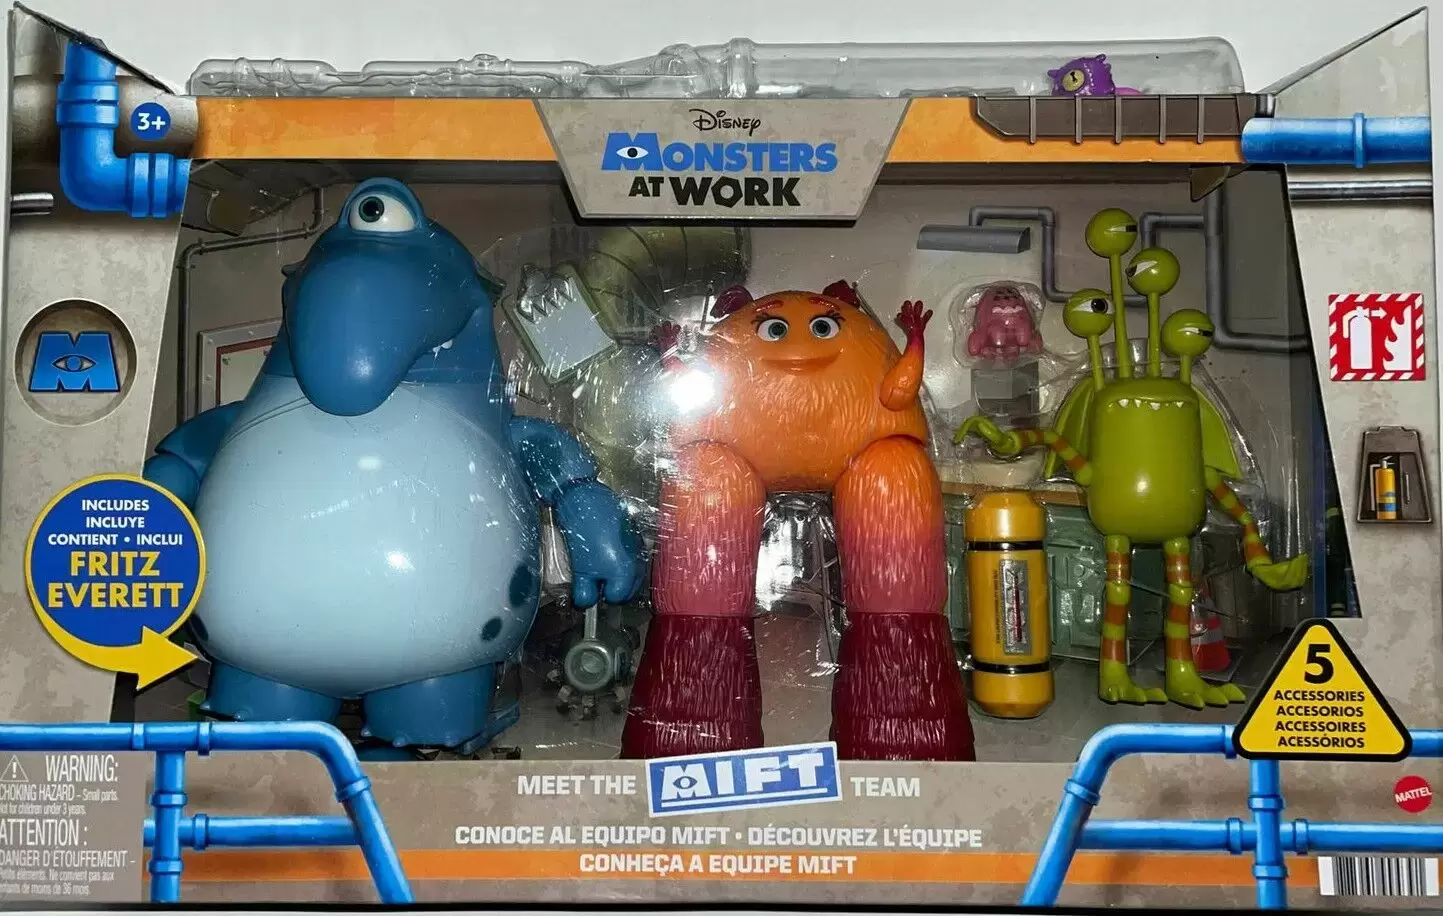 Monsters at Work - Meet the MIFT Team Figures Pack